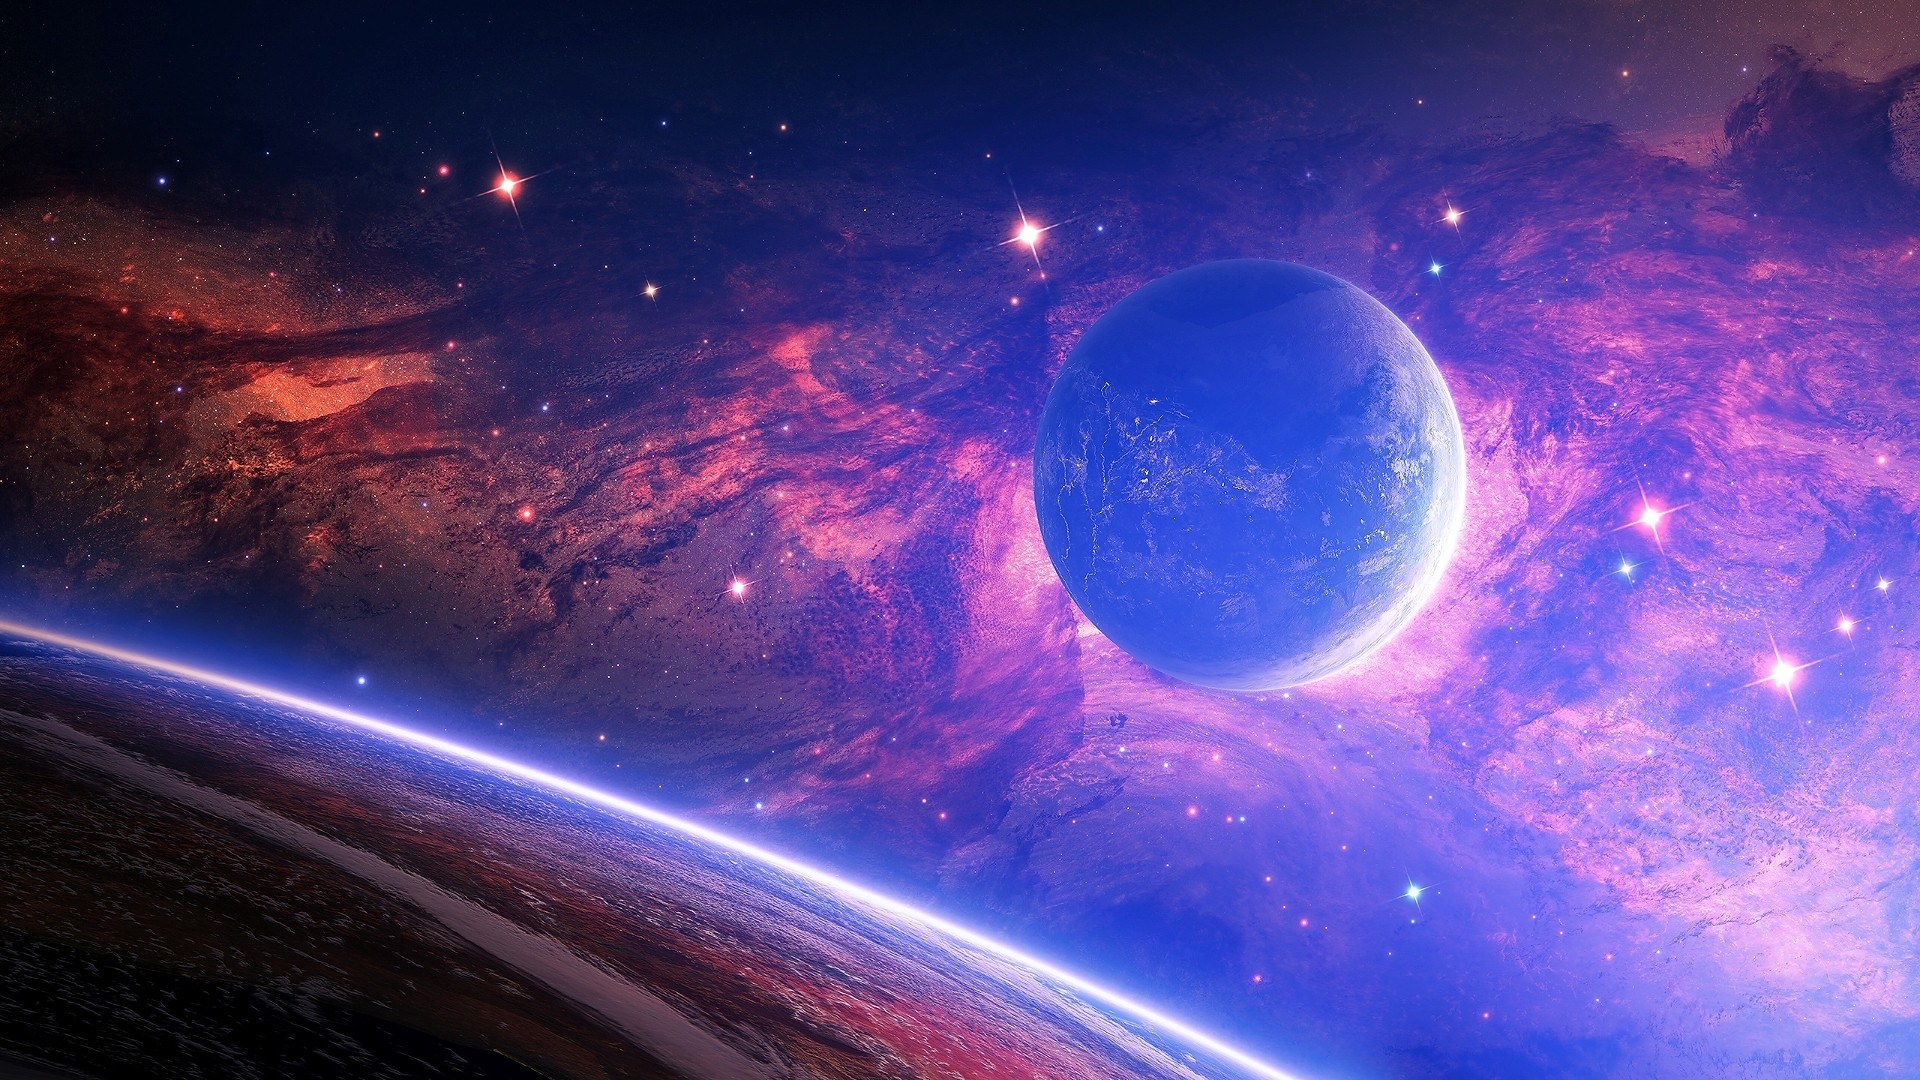 50 Hd Space Wallpapers Backgrounds For Free Download